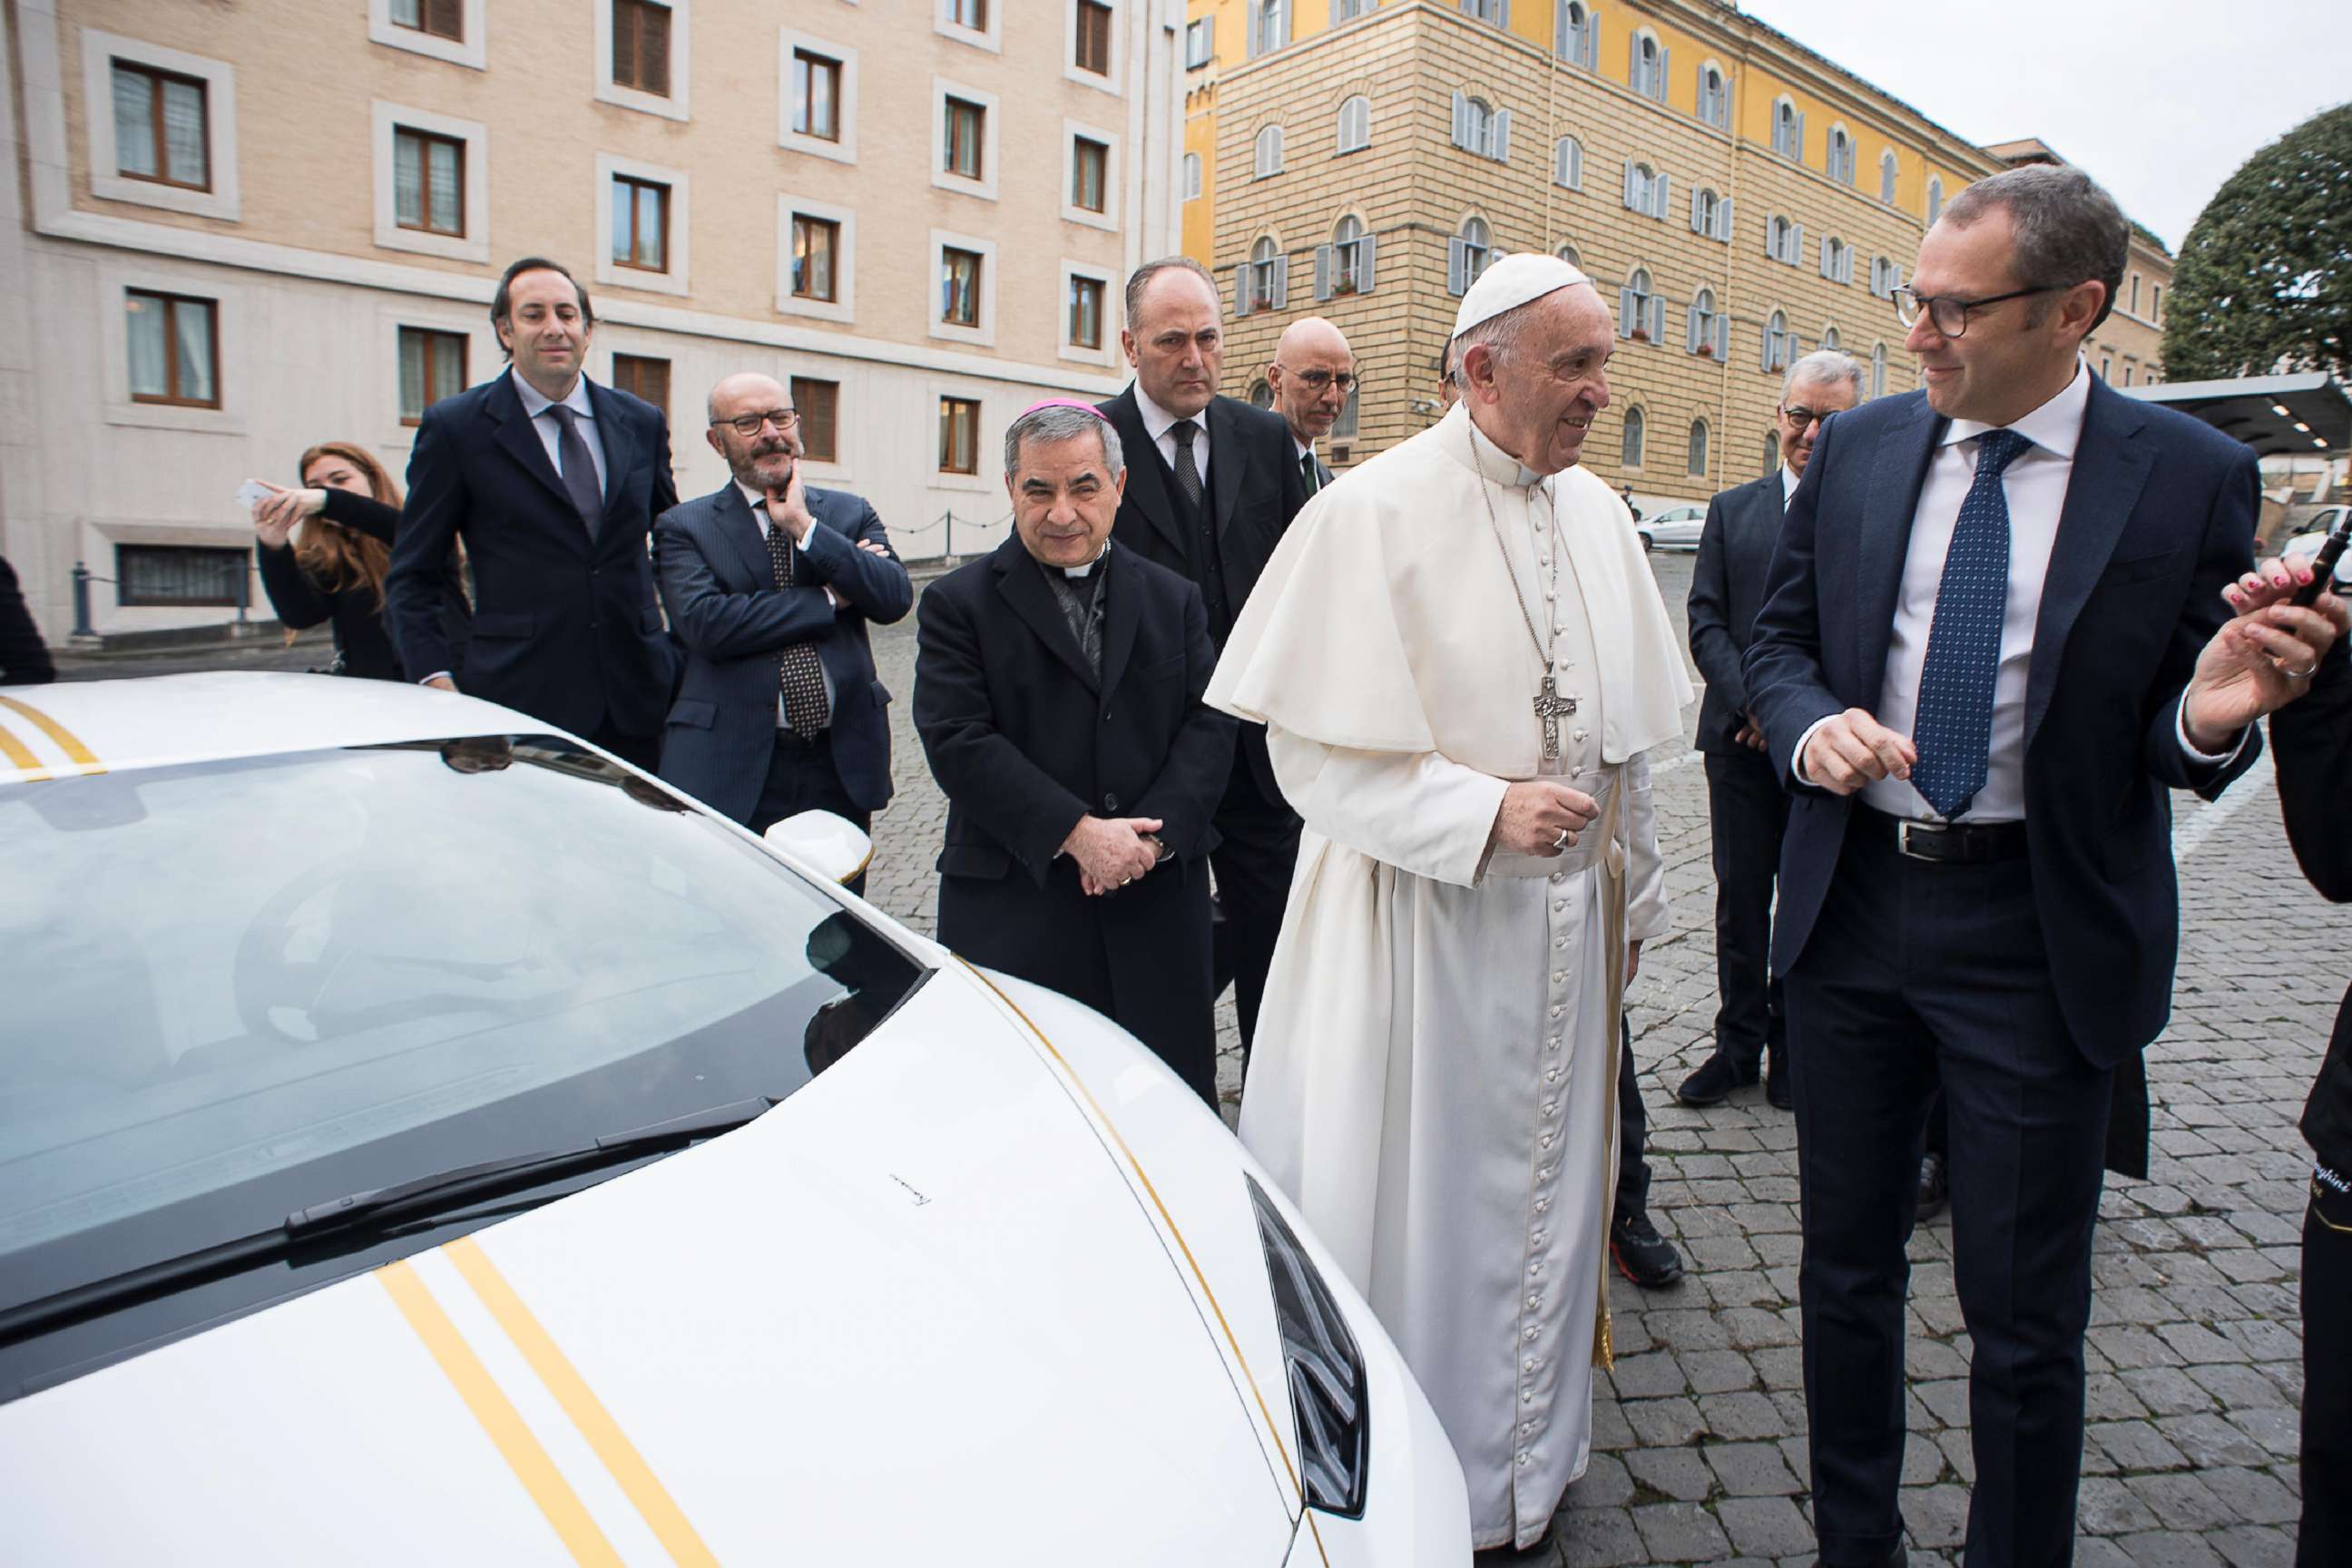 PHOTO: This handout photo taken Nov. 15, 2017, released by the Vatican press office, Osservatore Romano, shows Pope Francis speaking with Lambhorgini CEO Stefano Domenicali (R) after receiving a Lamborghini Huracan as a gift from the Italian car company.